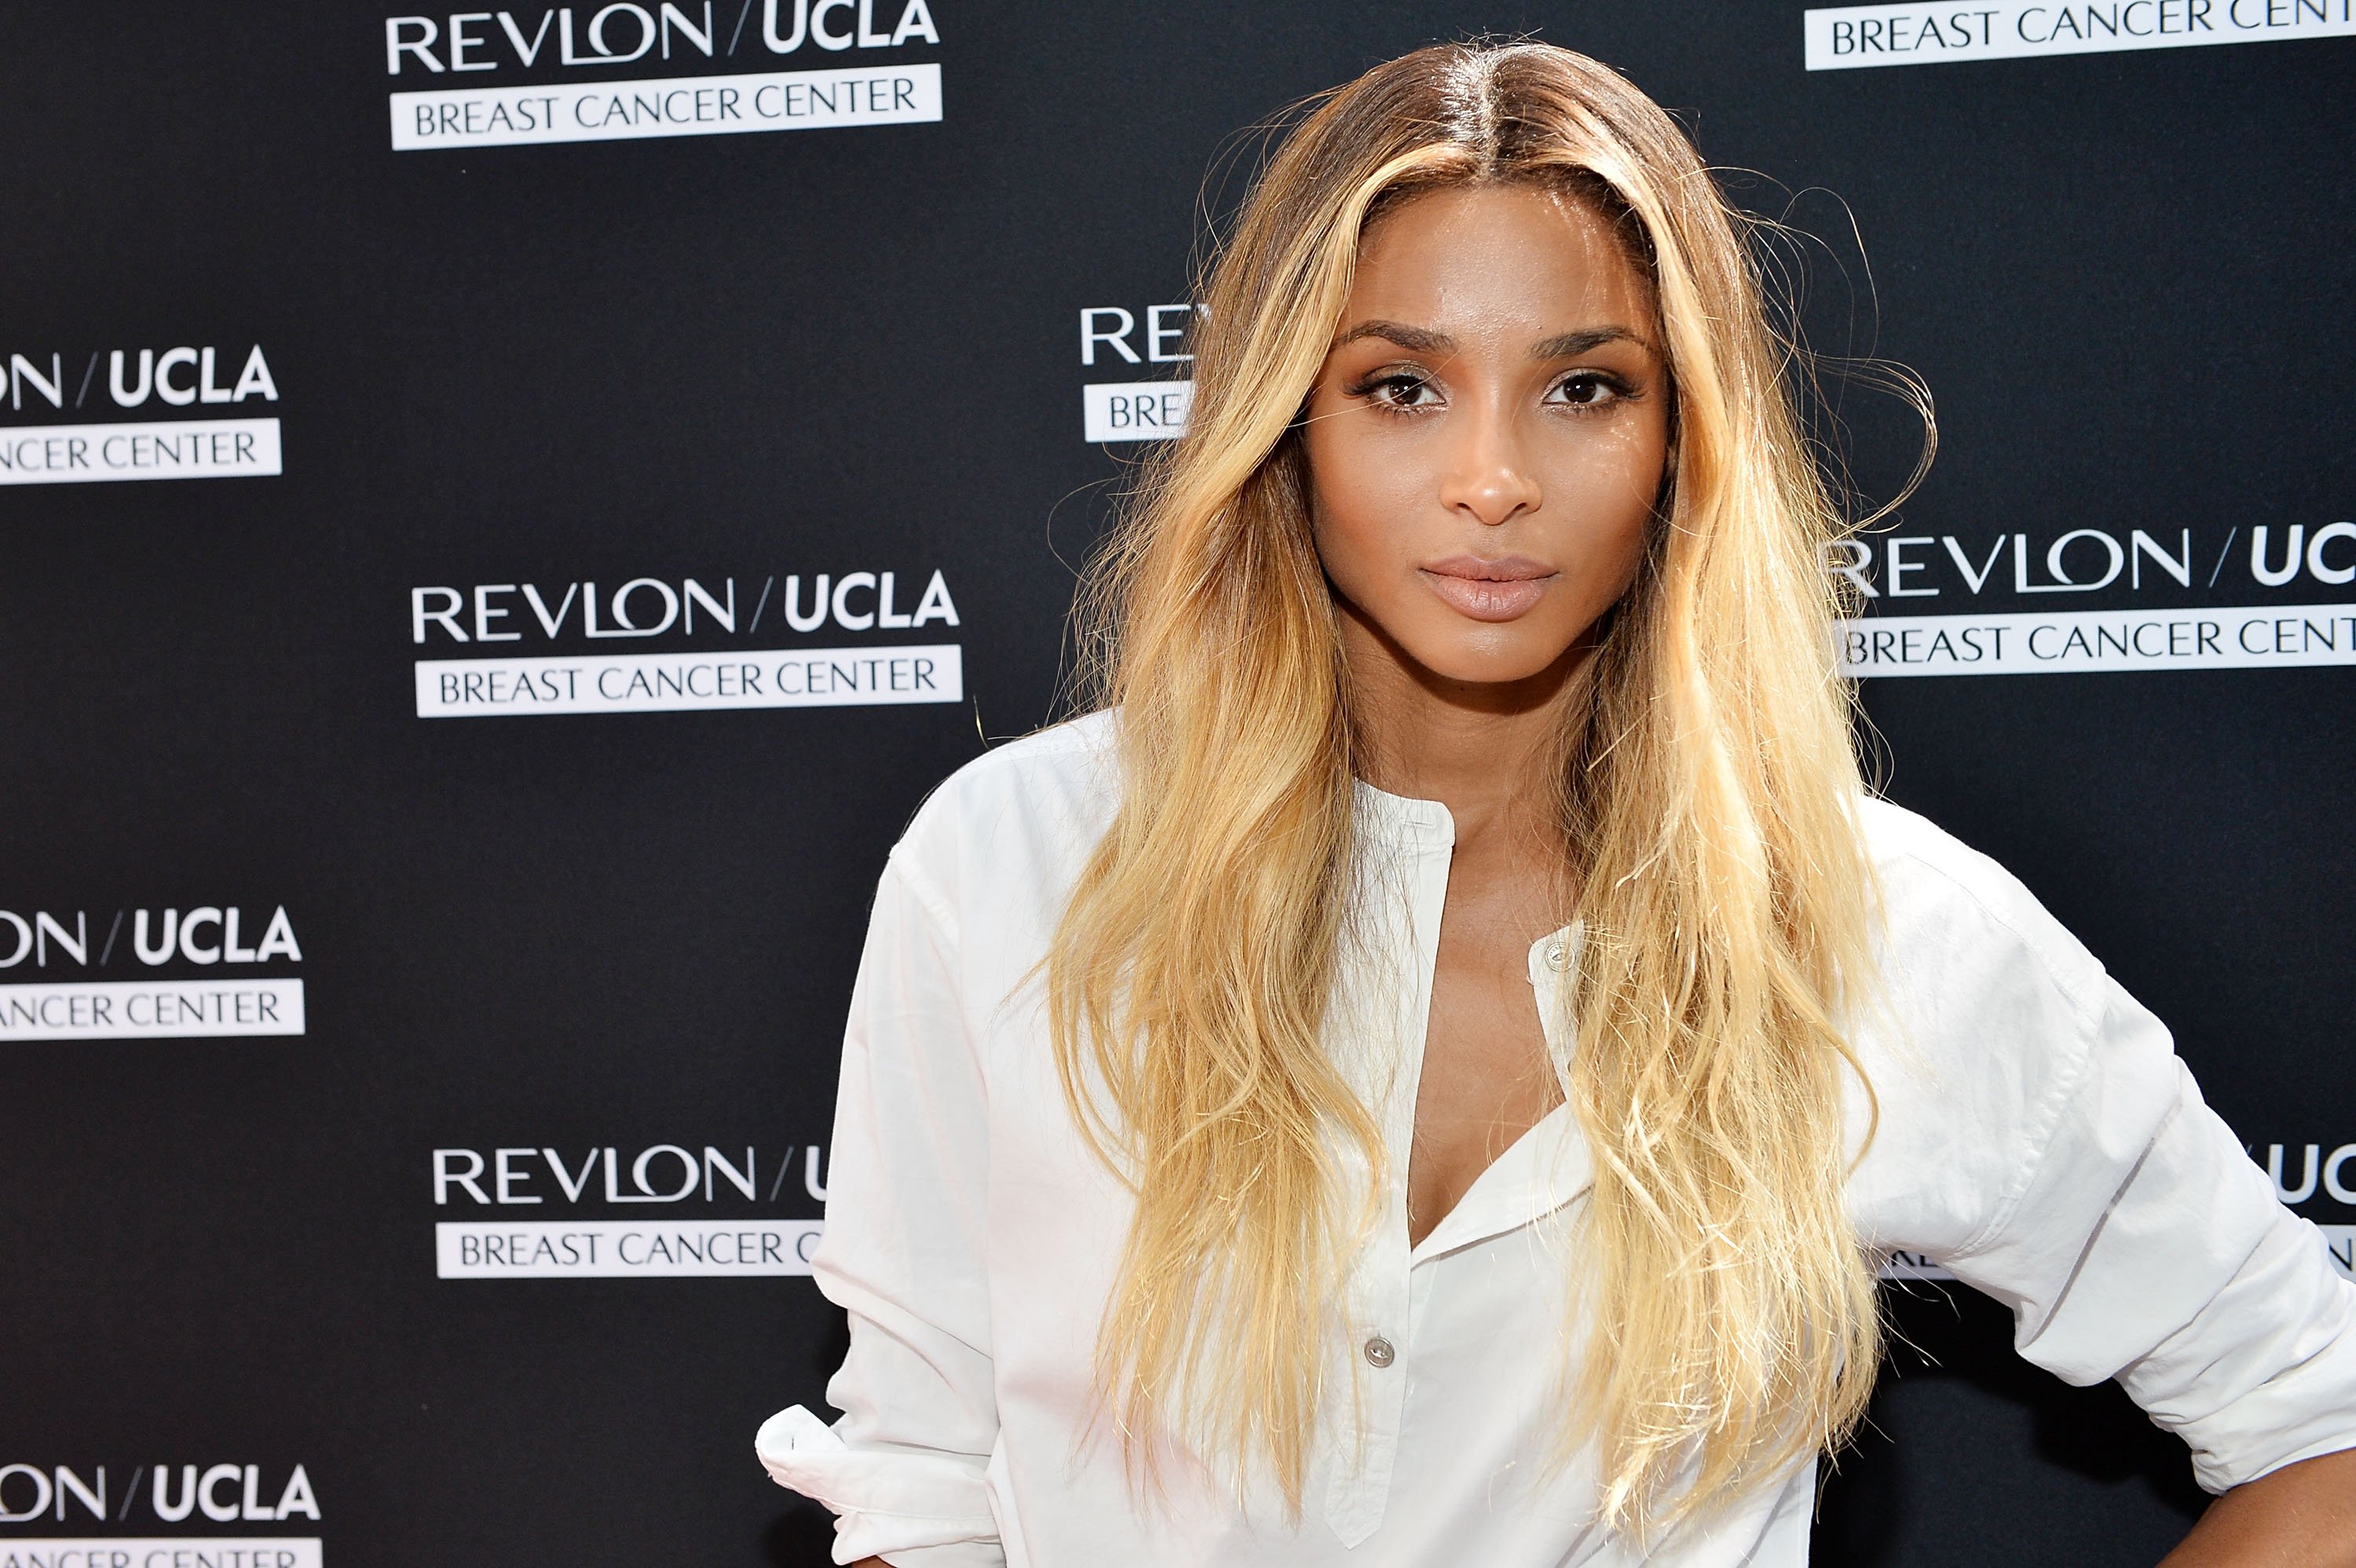 Ciara attends Revlon's Annual Philanthropic Luncheon on September 27, 2016 in Los Angeles, California. | Source: Getty Images